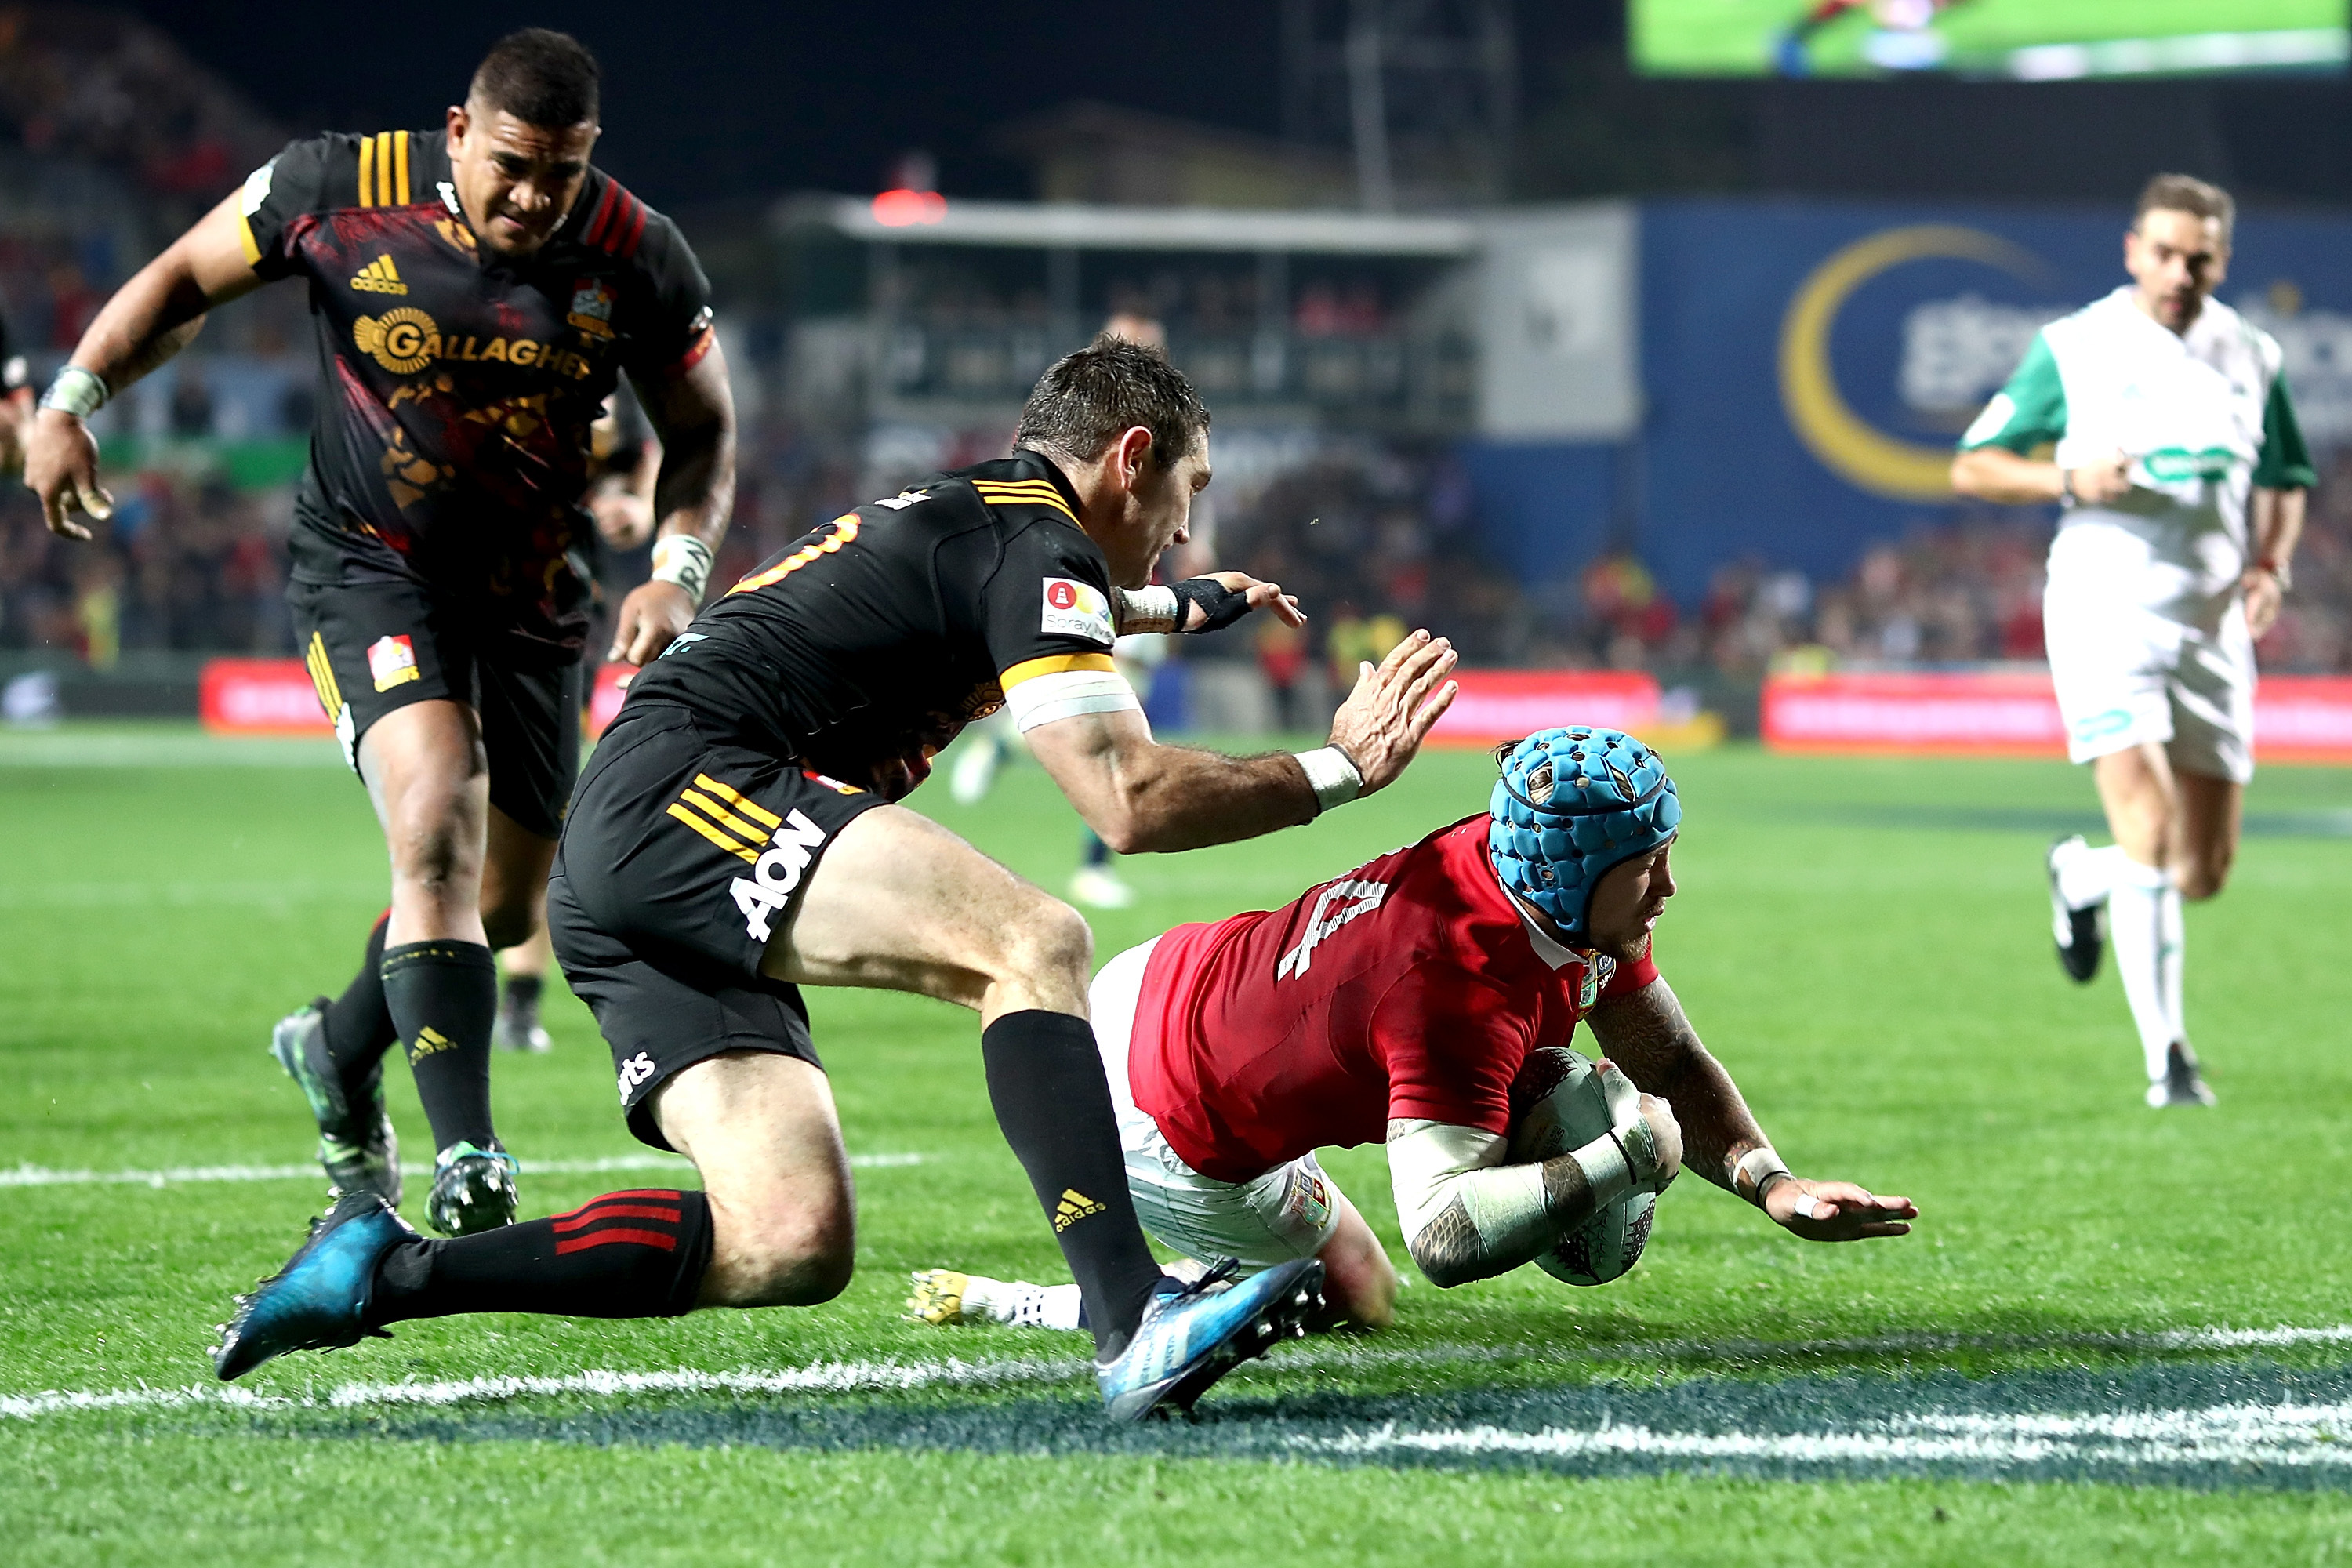 Jack Nowell scores his second try for the Lions in defeating the Chiefs in Hamilton.